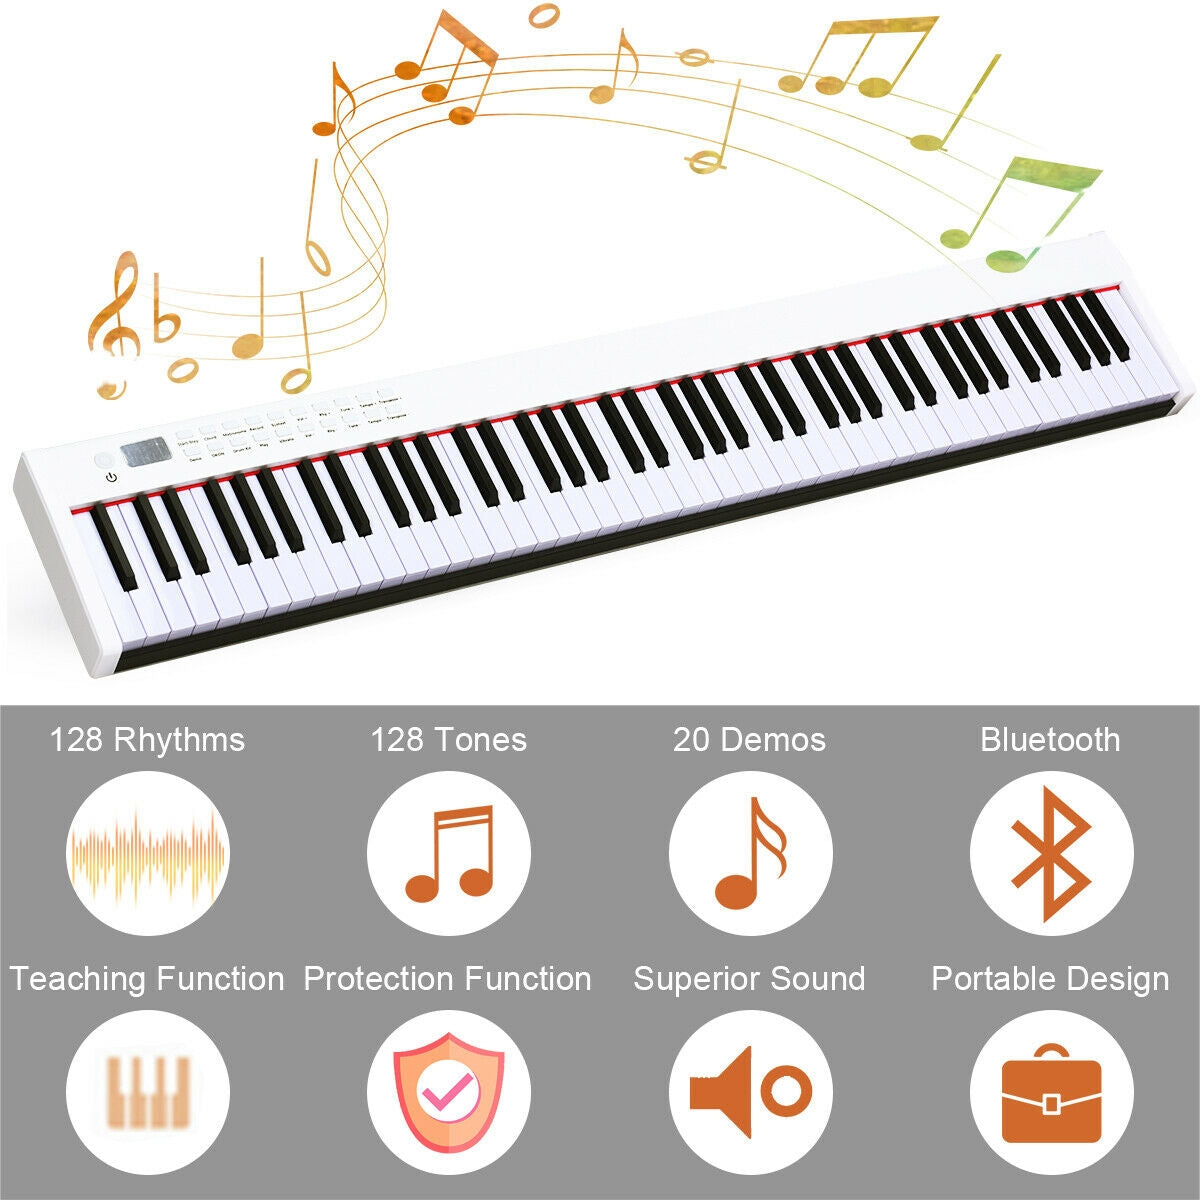 BX-II 88-key Portable Digital Piano with  MP3-White